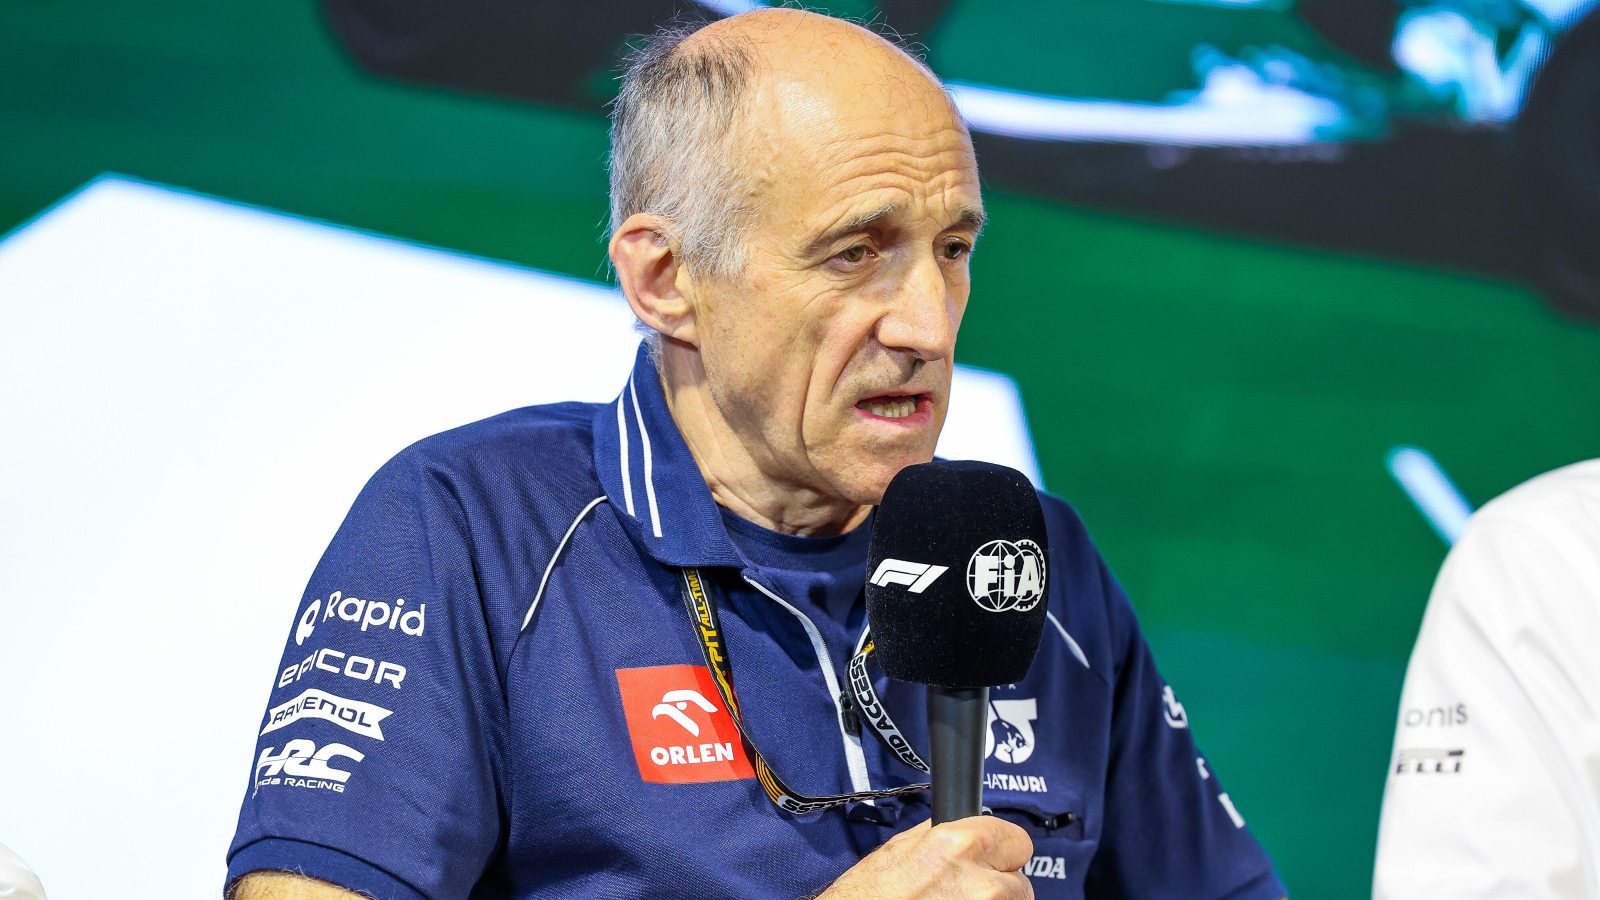 Franz Tost speaking during a press conference. Saudi Arabia, March 2023.